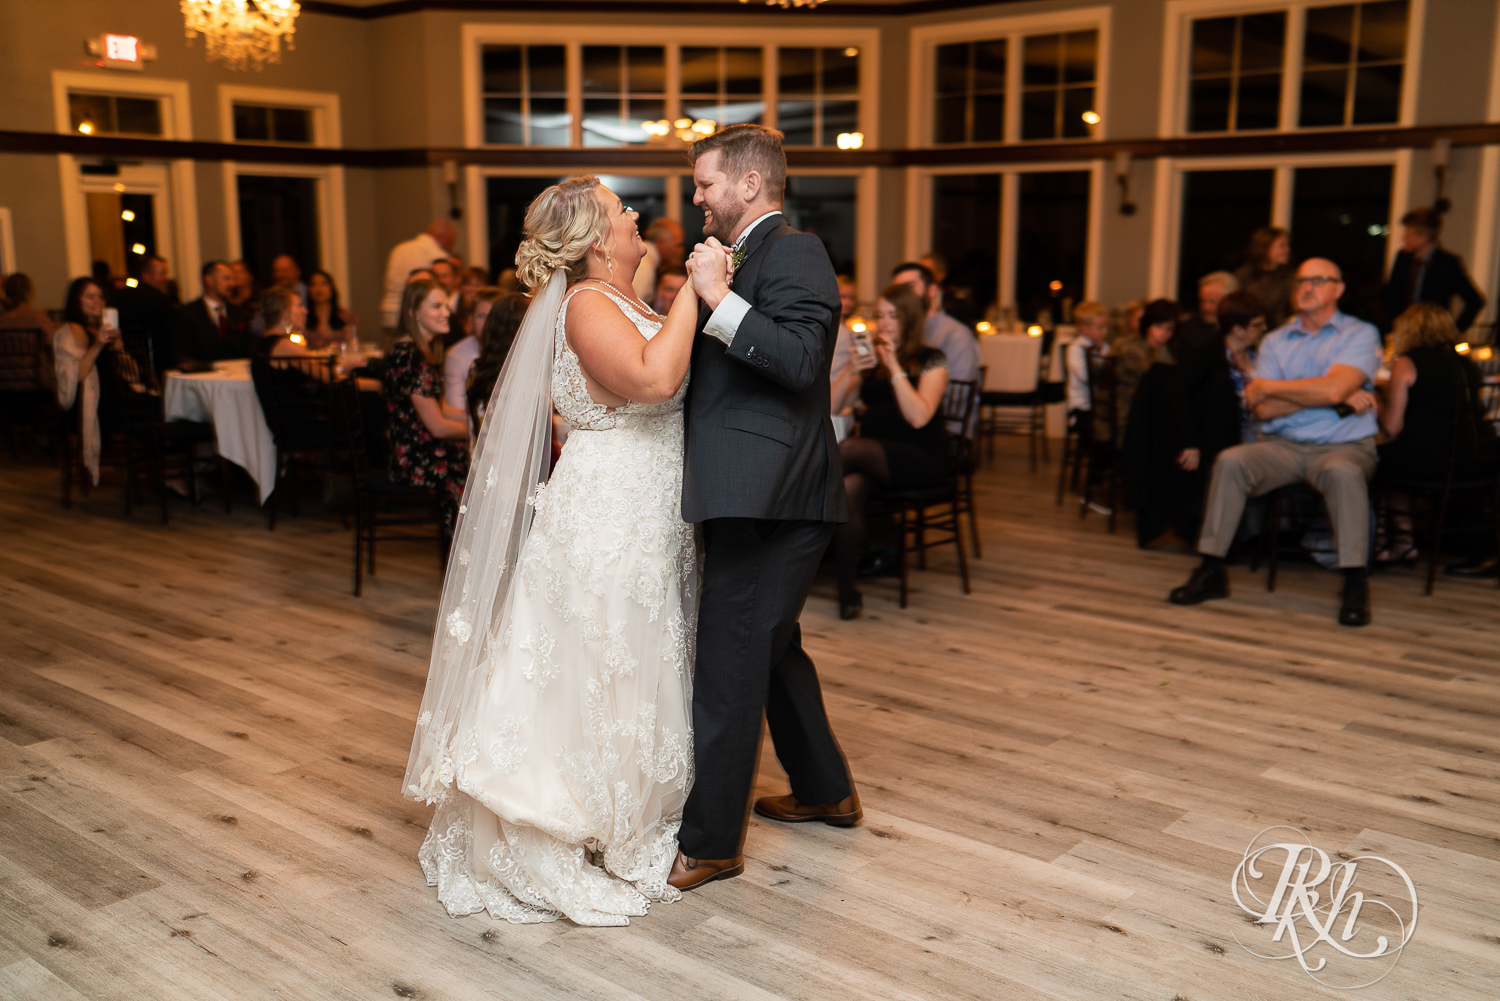 Bride and groom share first dance during wedding reception at Hastings Golf Club in Hastings, Minnesota.